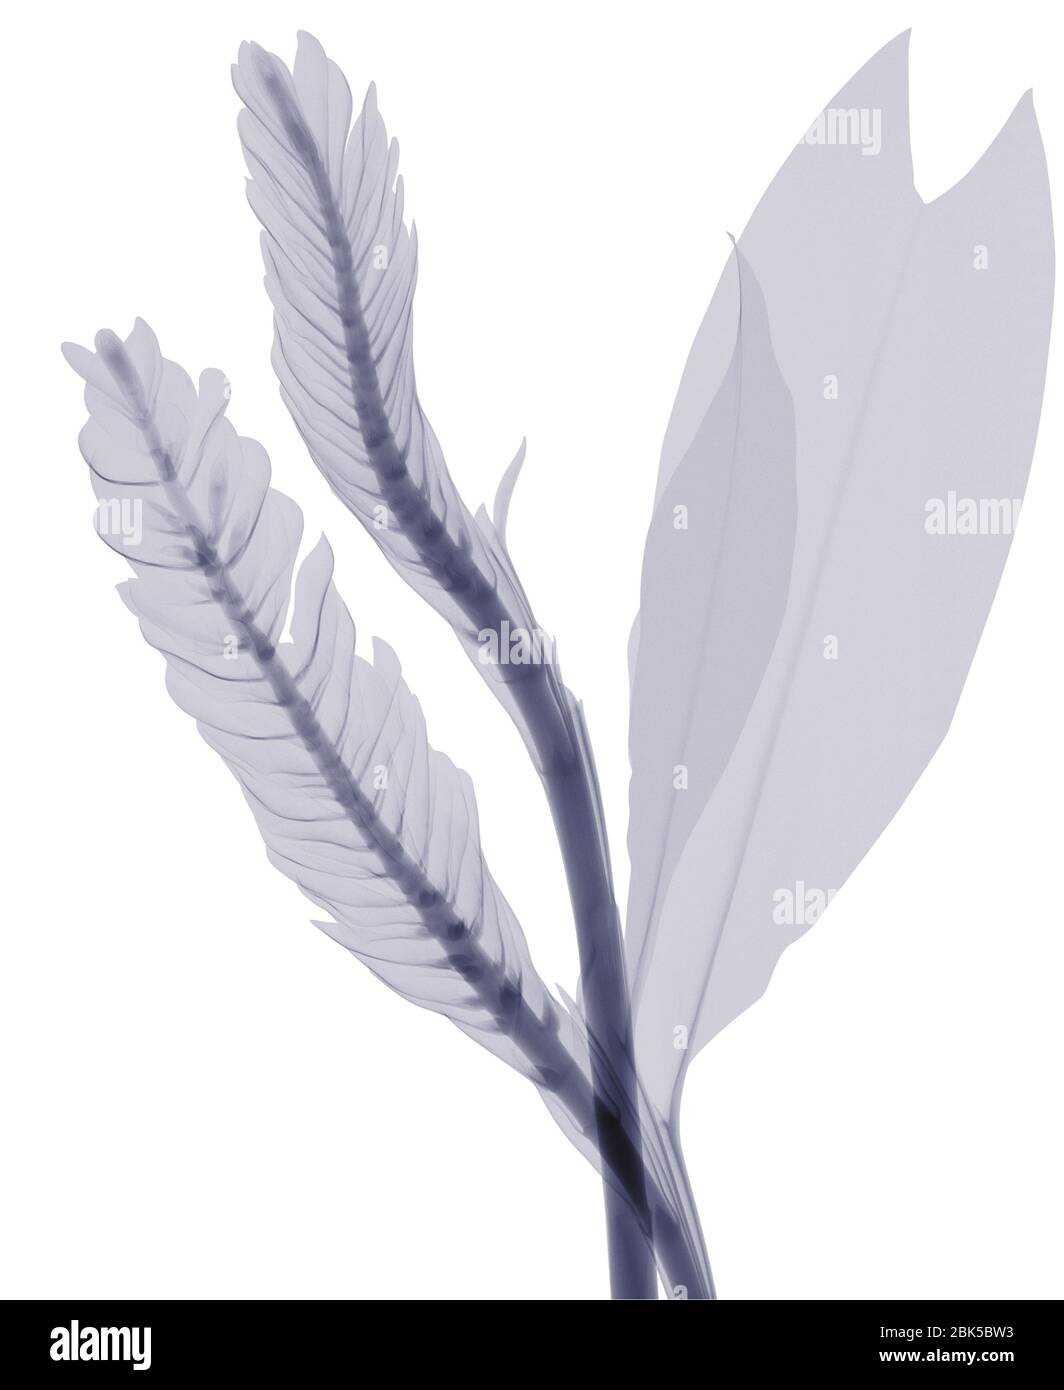 Two different types of leaves, X-ray. Stock Photo